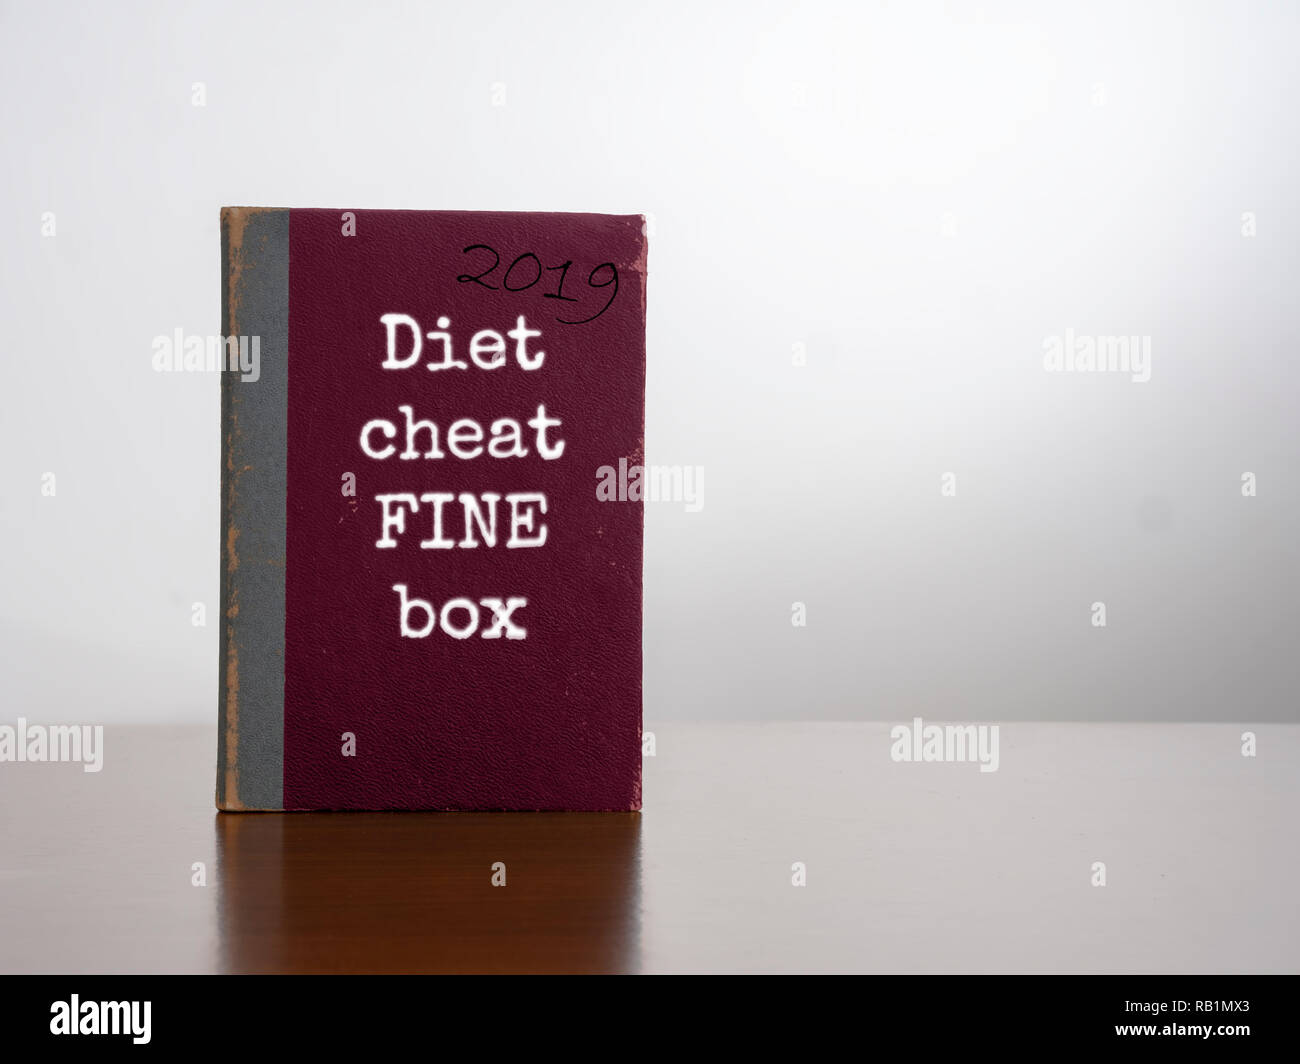 Diet cheat fine box, 2019. On desk. Resolution to lose weight Stock Photo